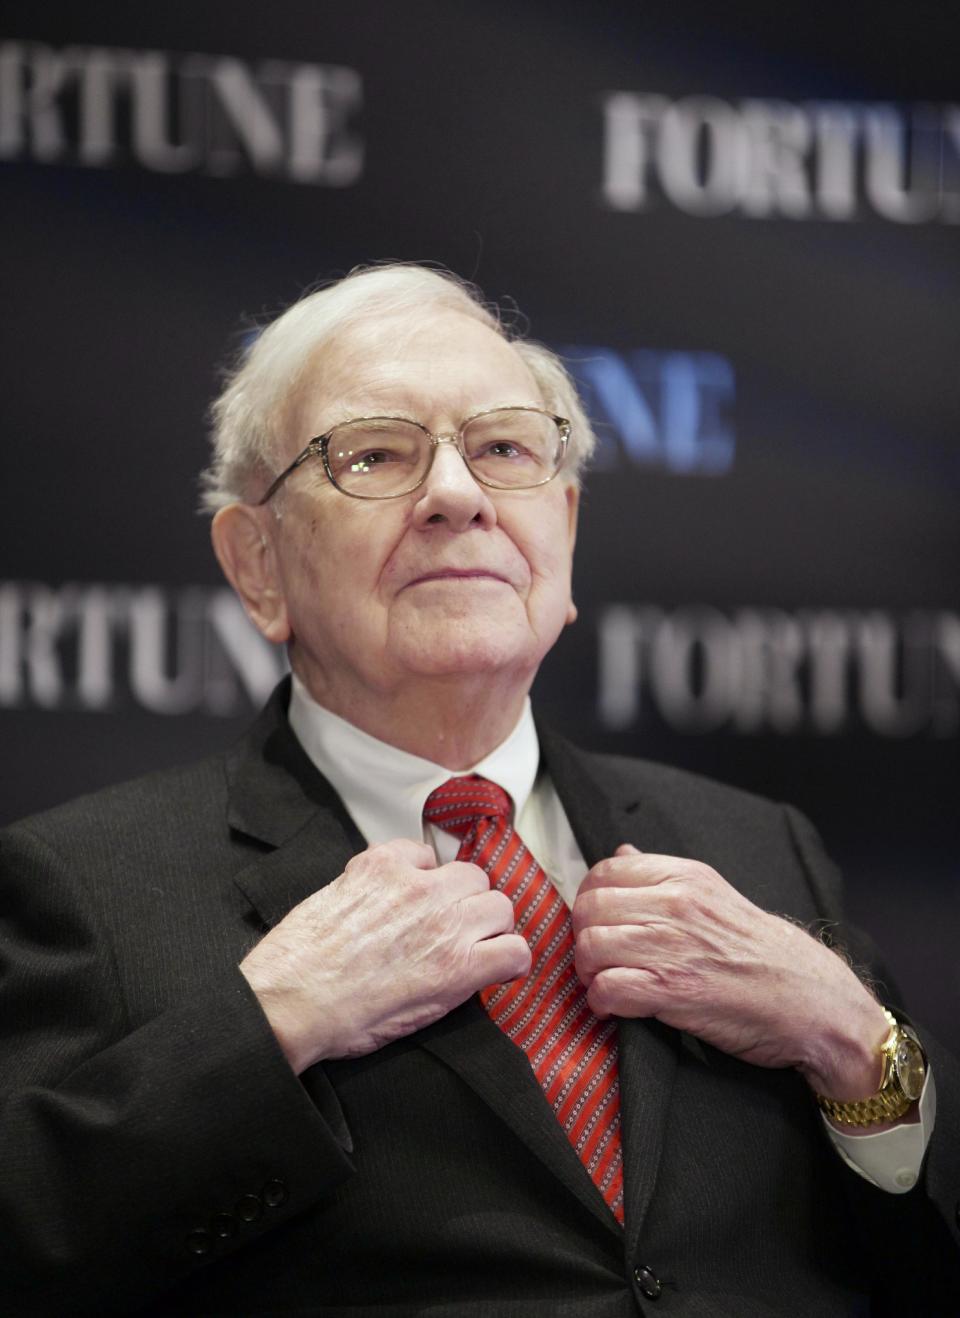 FILE - In this file photo from May 1, 2013, billionaire investor Warren Buffett attends a seminar in Omaha, Neb. Buffett’s failure to beat the stock market in four of the past five years has inspired debate about whether Berkshire Hathaway’s 83-year-old CEO has lost his touch. Buffett and Berkshire Vice Chairman Charlie Munger are likely to face questions about the conglomerate’s performance when more than 30,000 shareholders gather for the company’s annual meeting in Omaha on Saturday. (AP Photo/Nati Harnik, File)